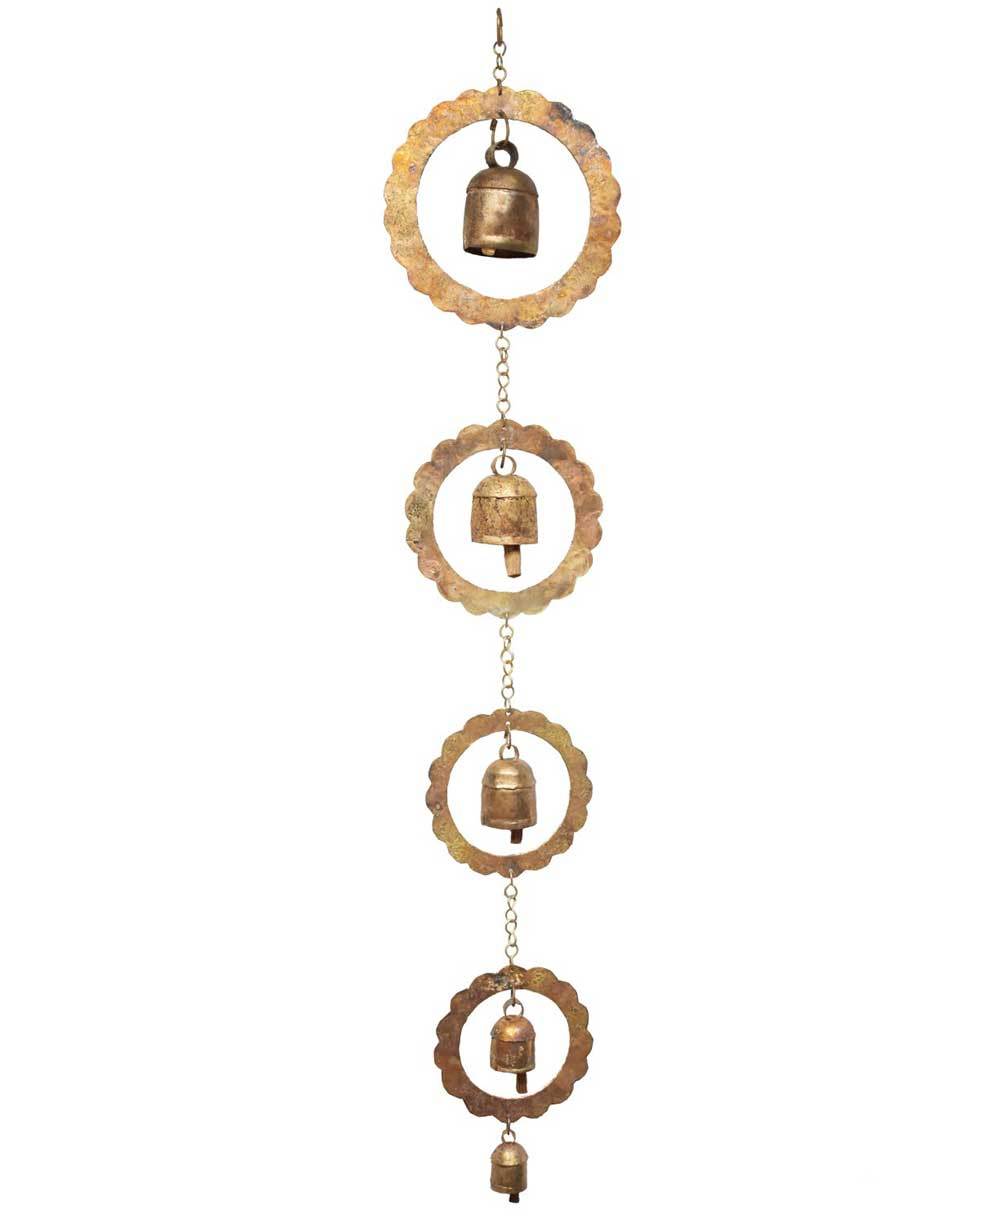 Fair Trade Blossom Chime with Indian Bells - Wall Art